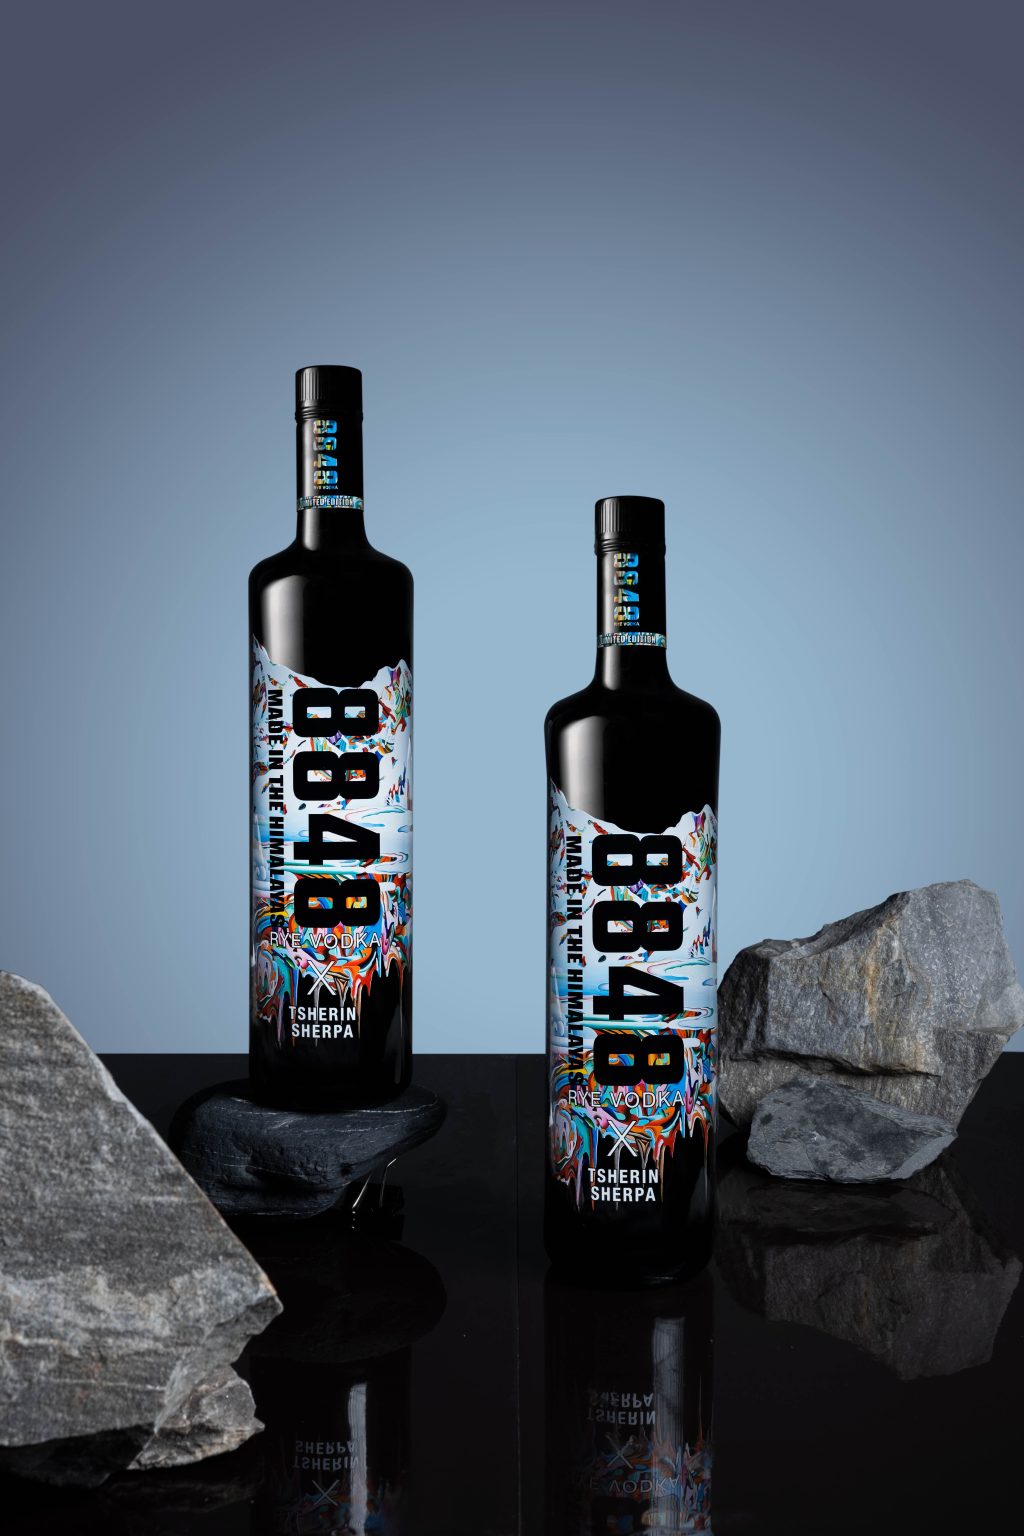 Yeti Distillery launches 8848 Rye Vodka with a limited-edition bottle in collaboration with Tsherin Sherpa